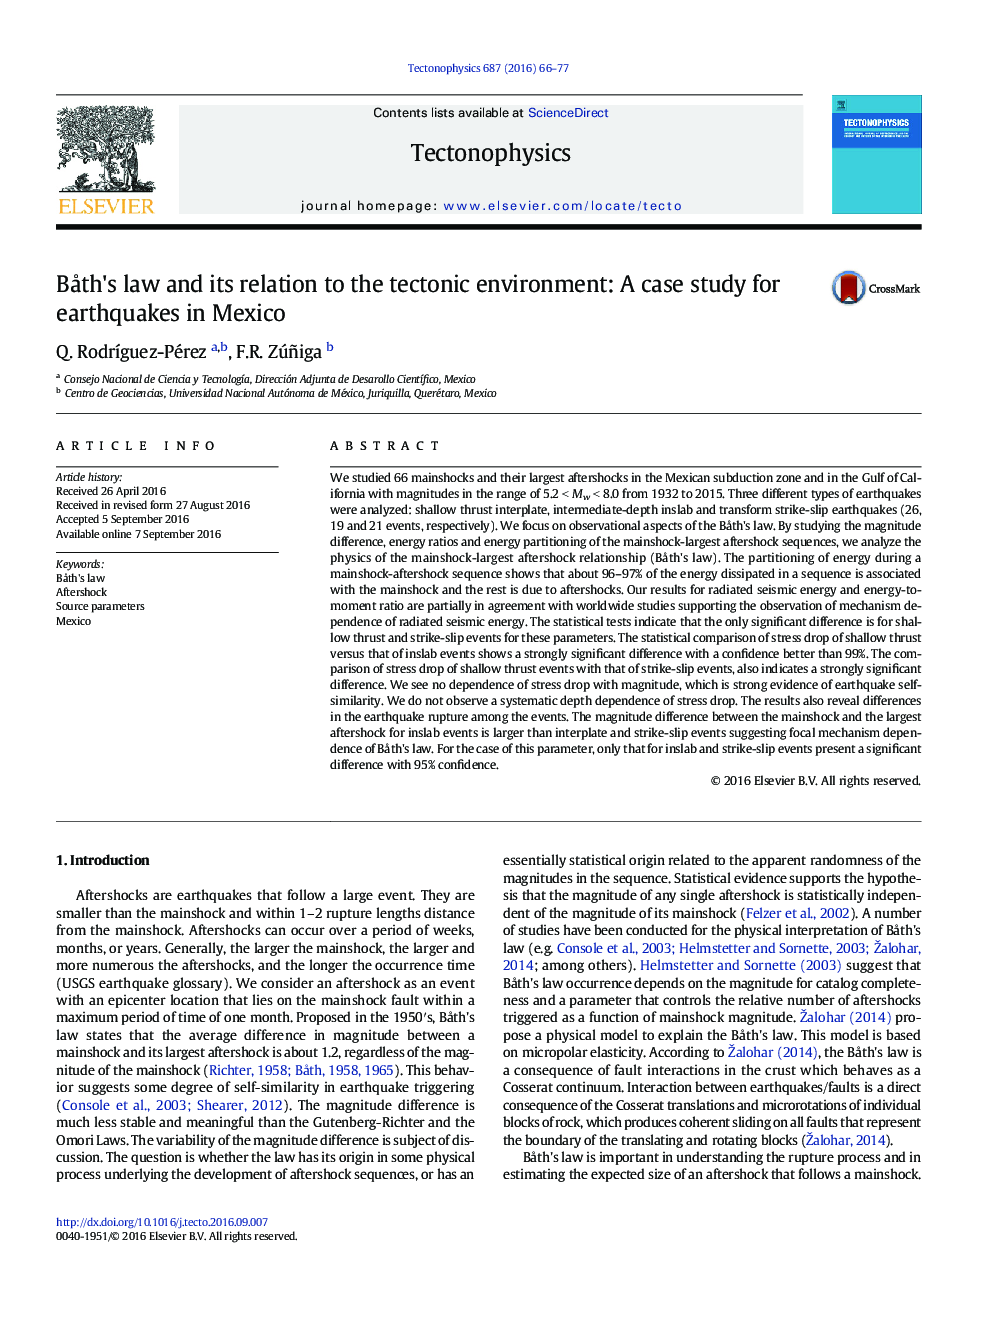 Båth's law and its relation to the tectonic environment: A case study for earthquakes in Mexico